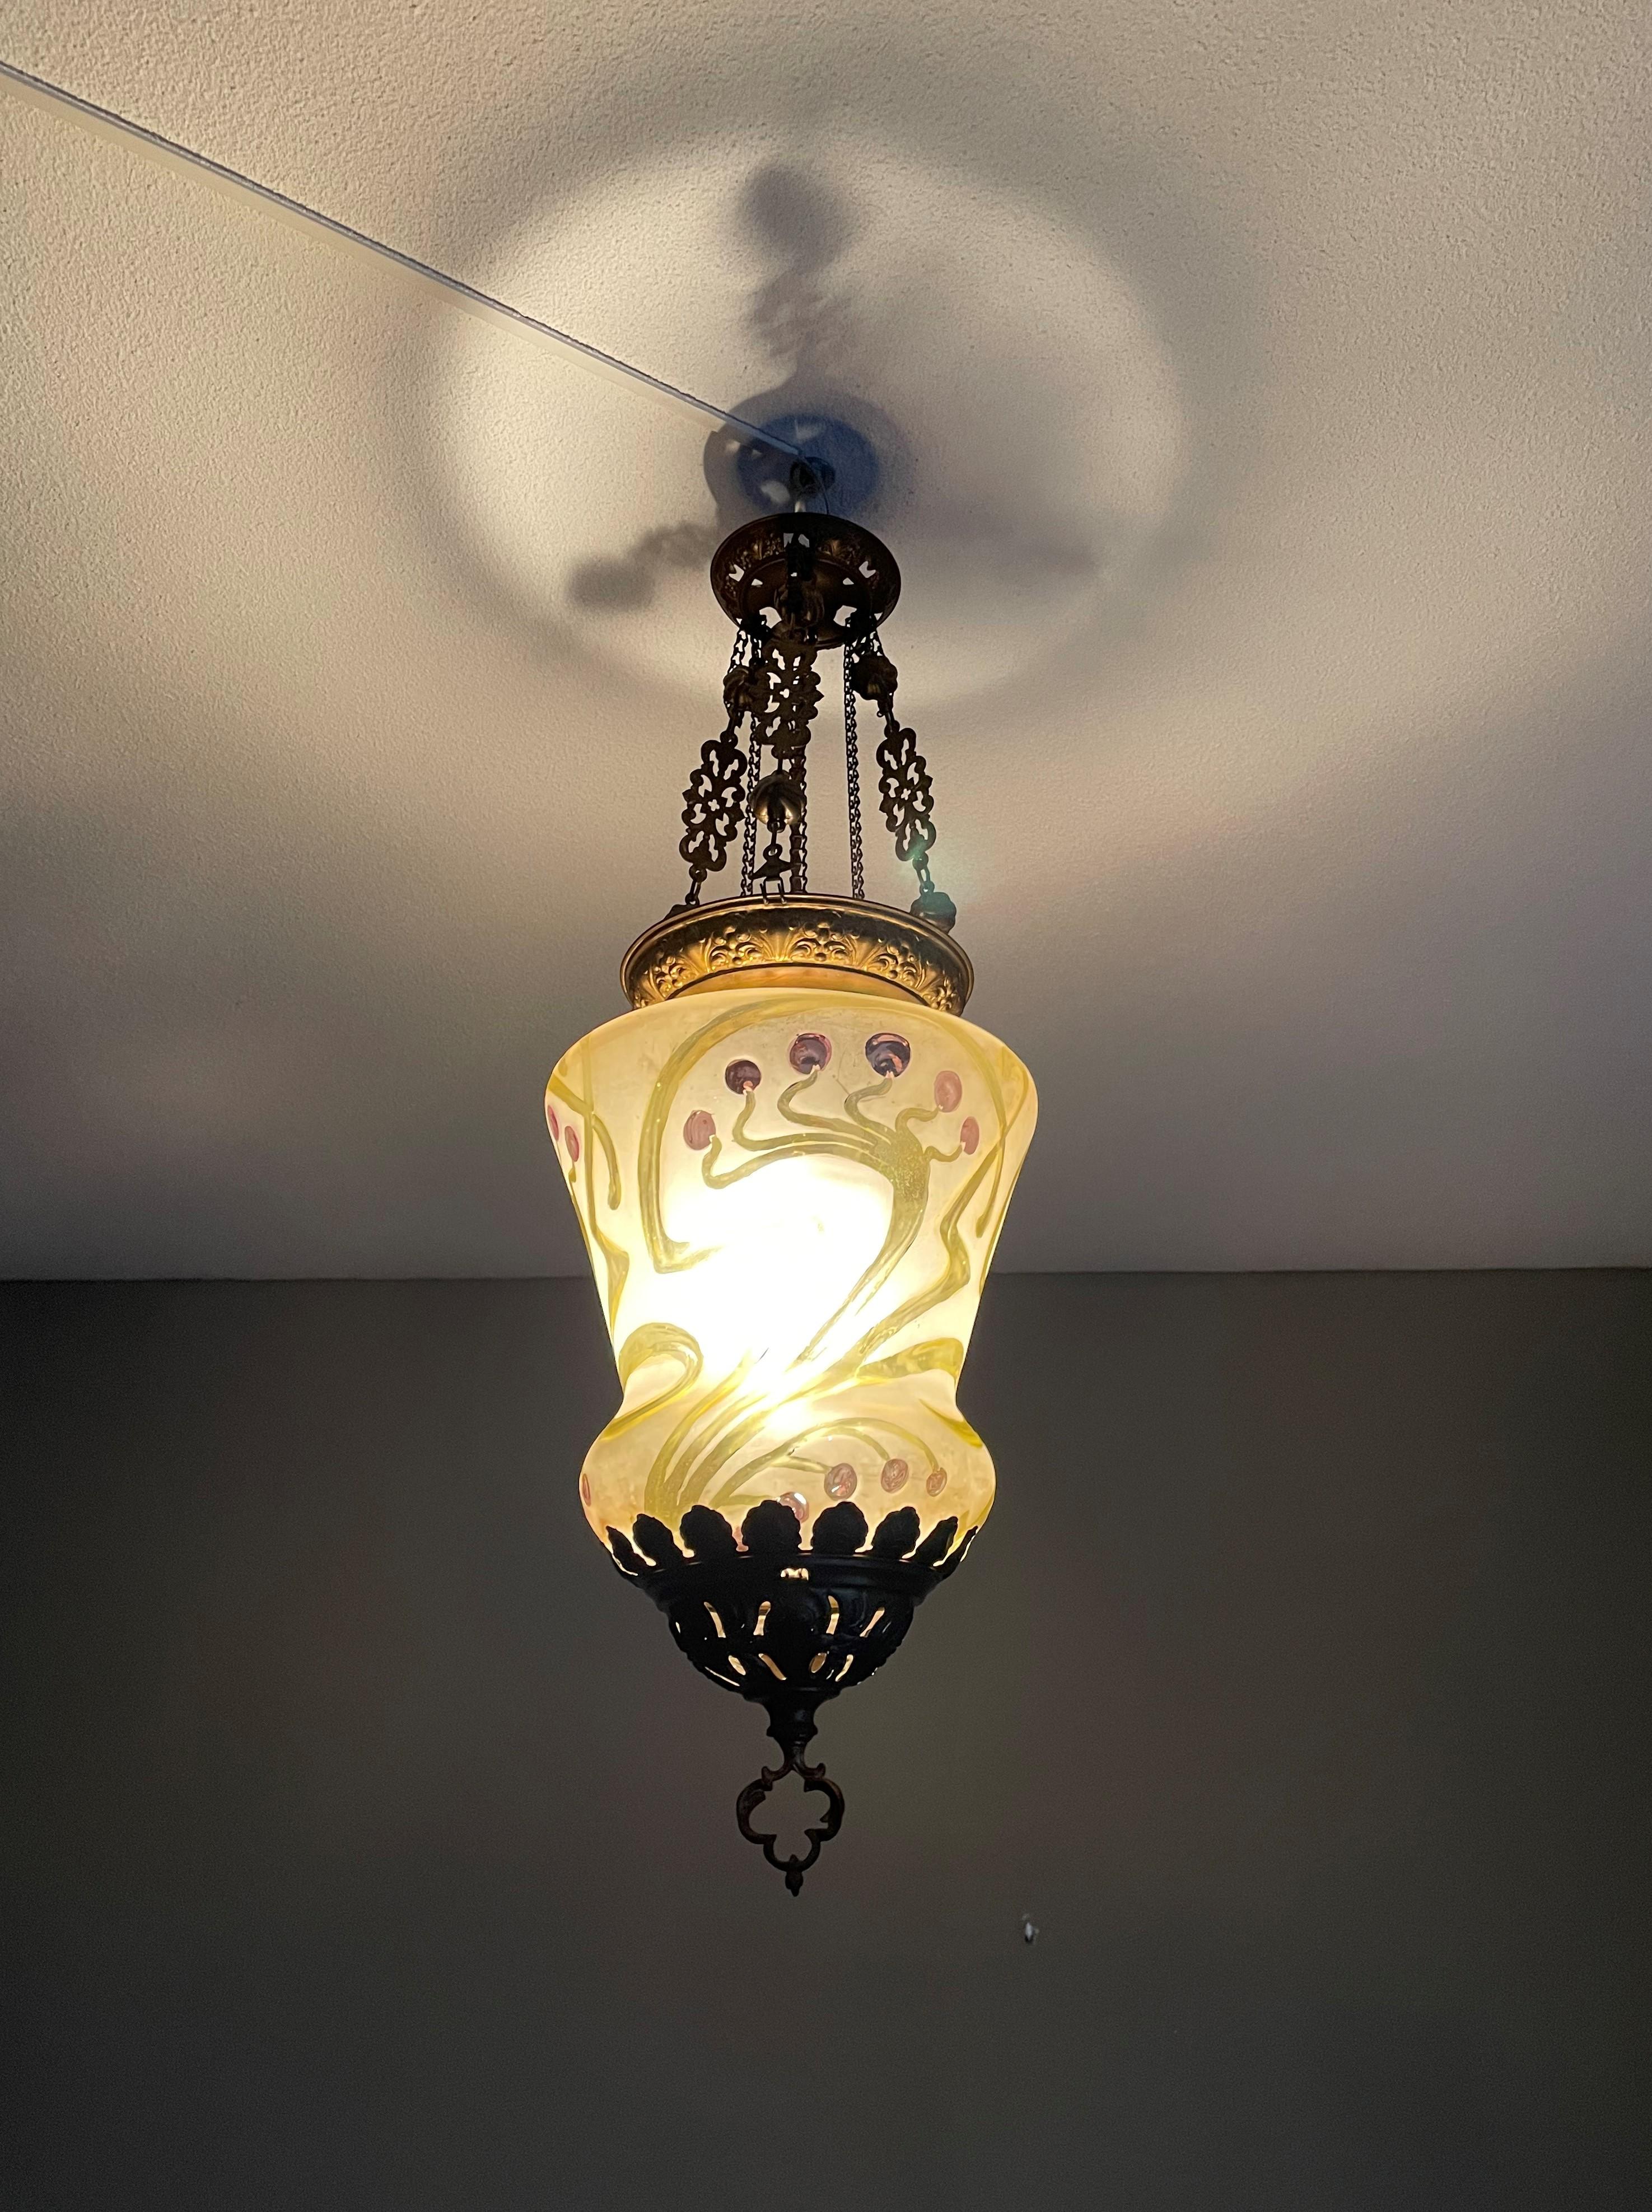 Graceful and all handcrafted antique light fixture.

This early Arts & Crafts pendant has an aesthetic beauty that you don't find anymore in this day and age. It has the most pleasing to the eye shape and colors and the handcrafted brass has a